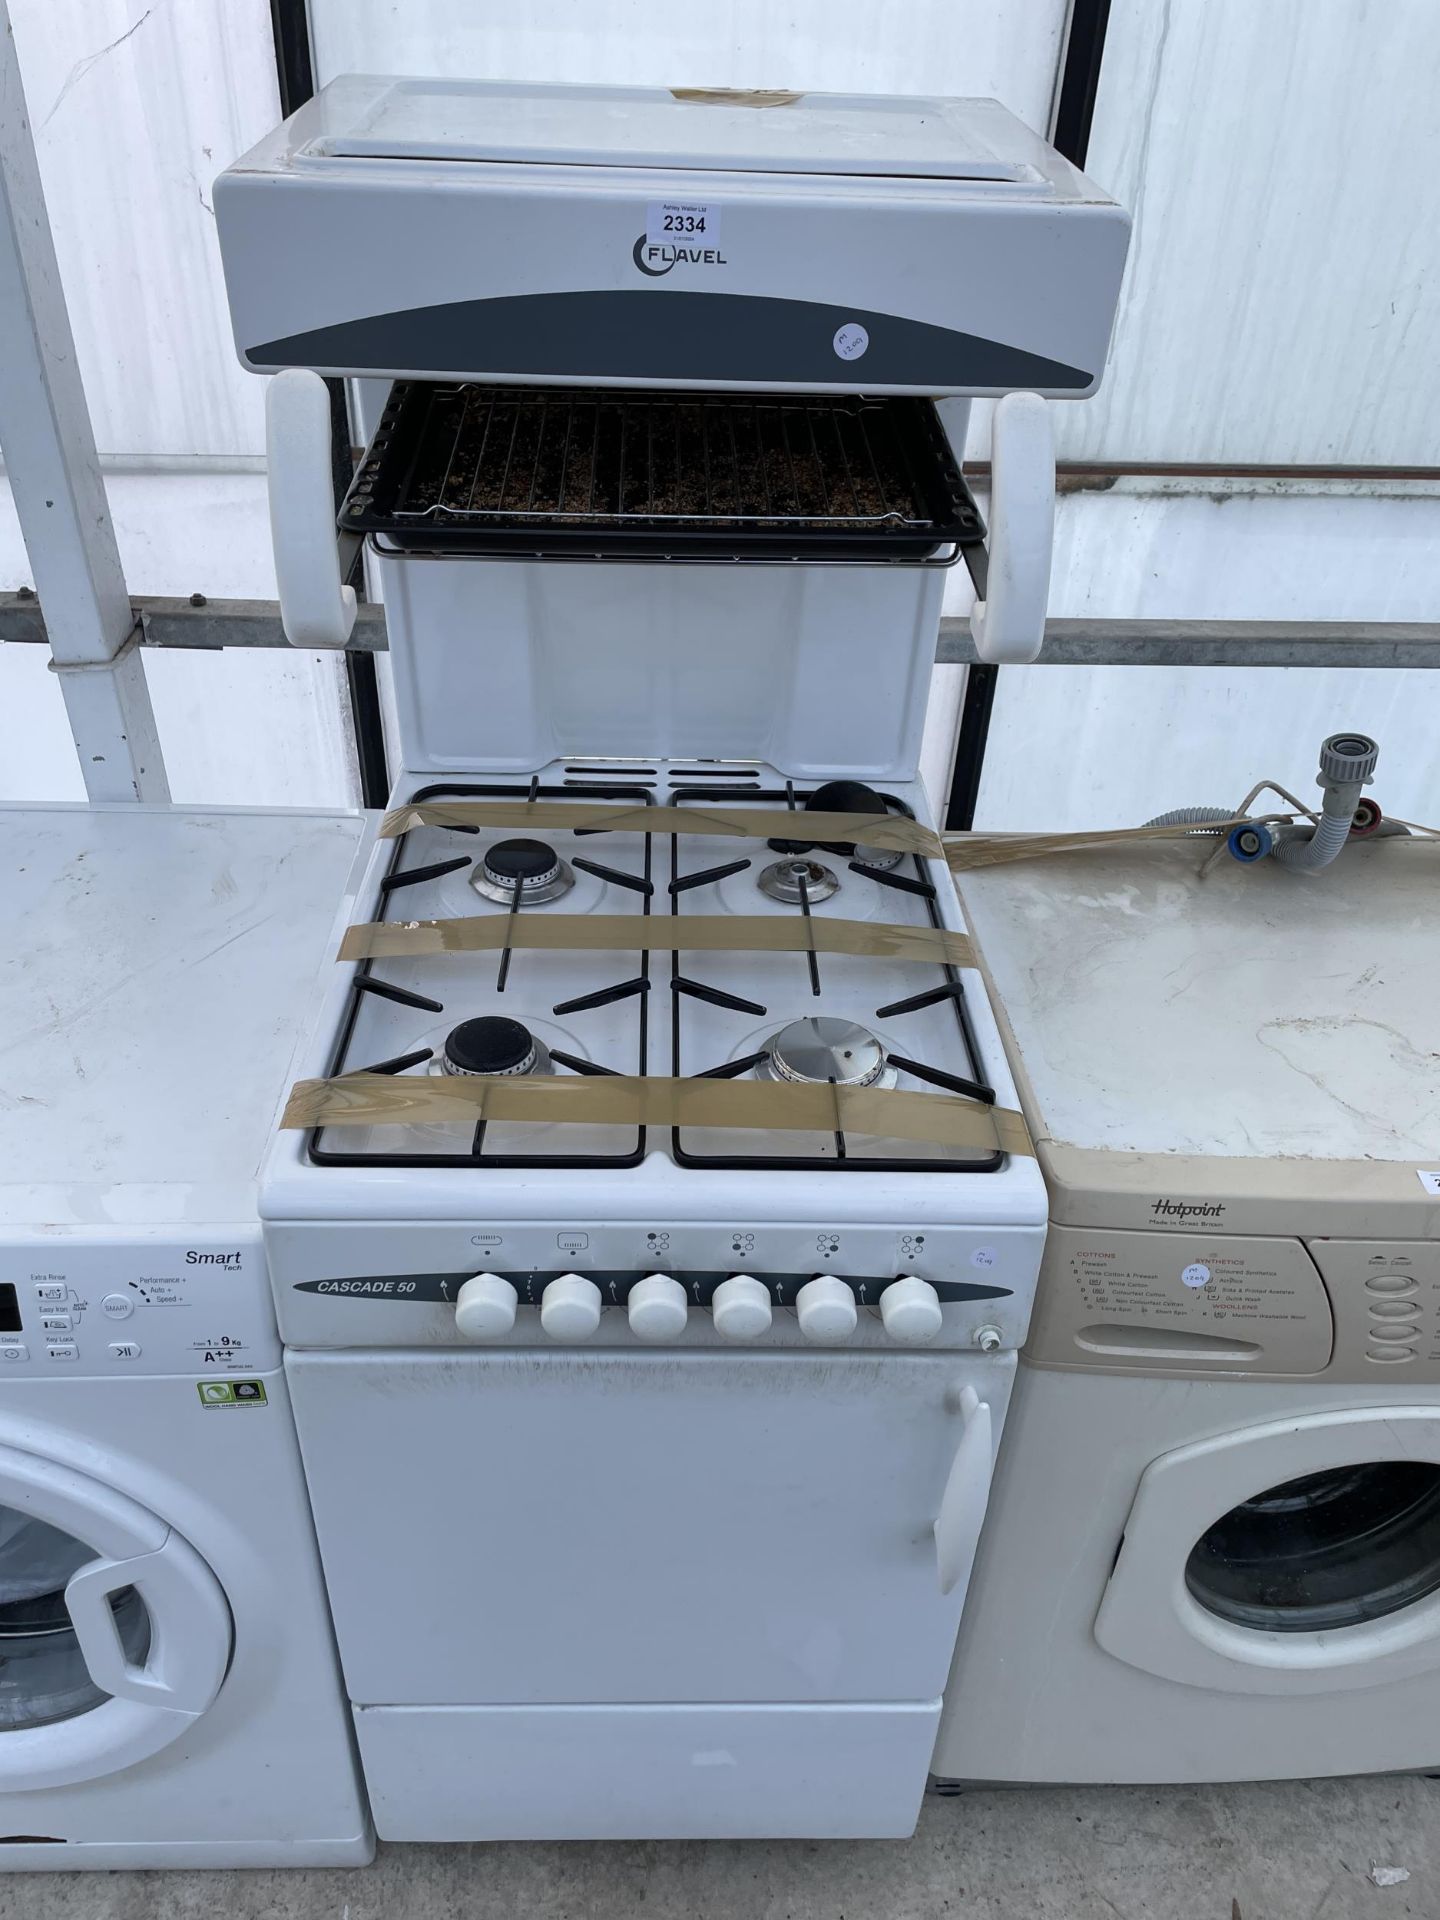 A WHITE FREESTANDING FLAVEL CASCADE 50 GAS OVEN AND HOB